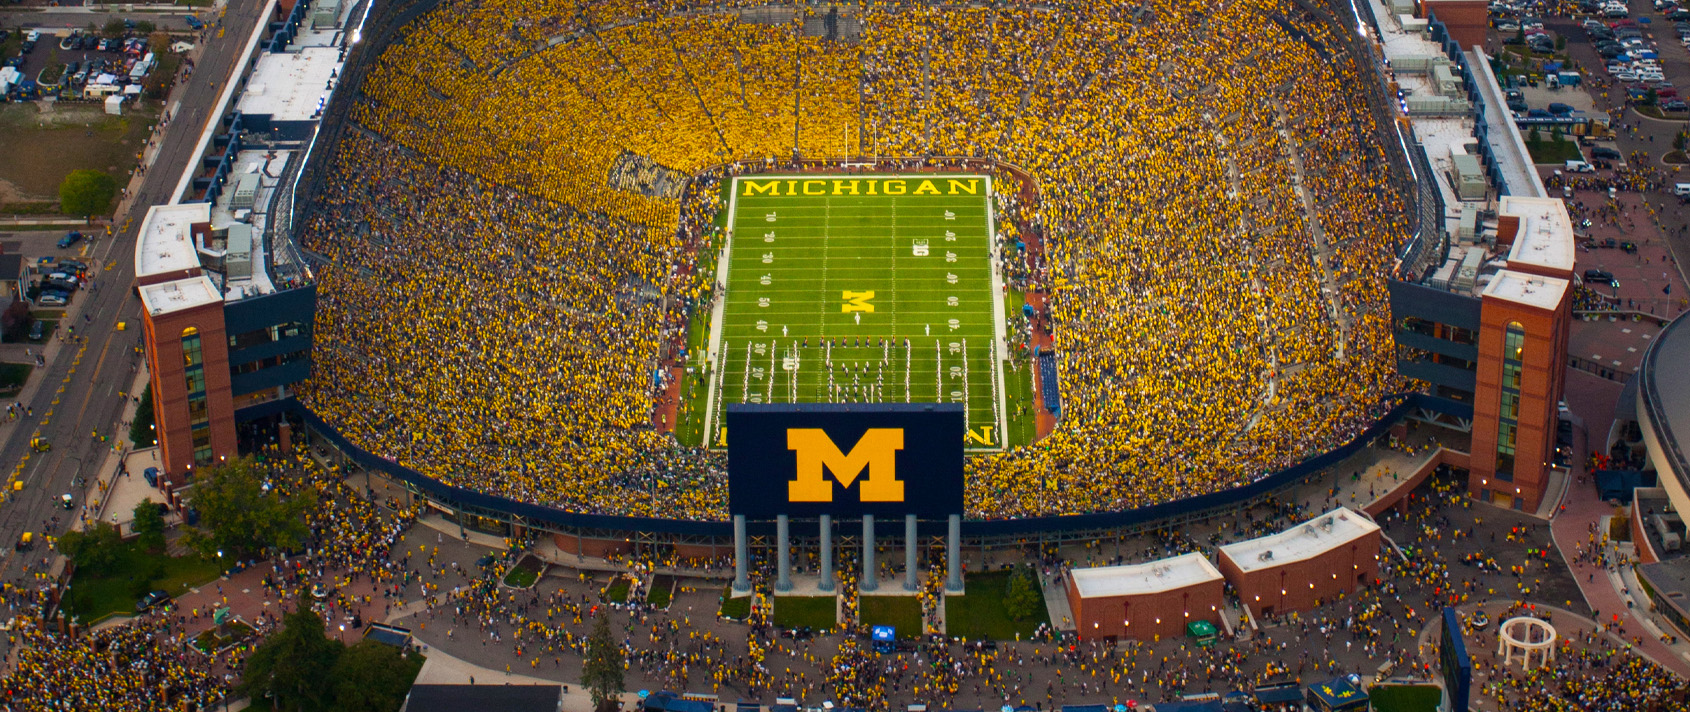 Overhead shot of a very filled Big House at night. Michigan logo is visible